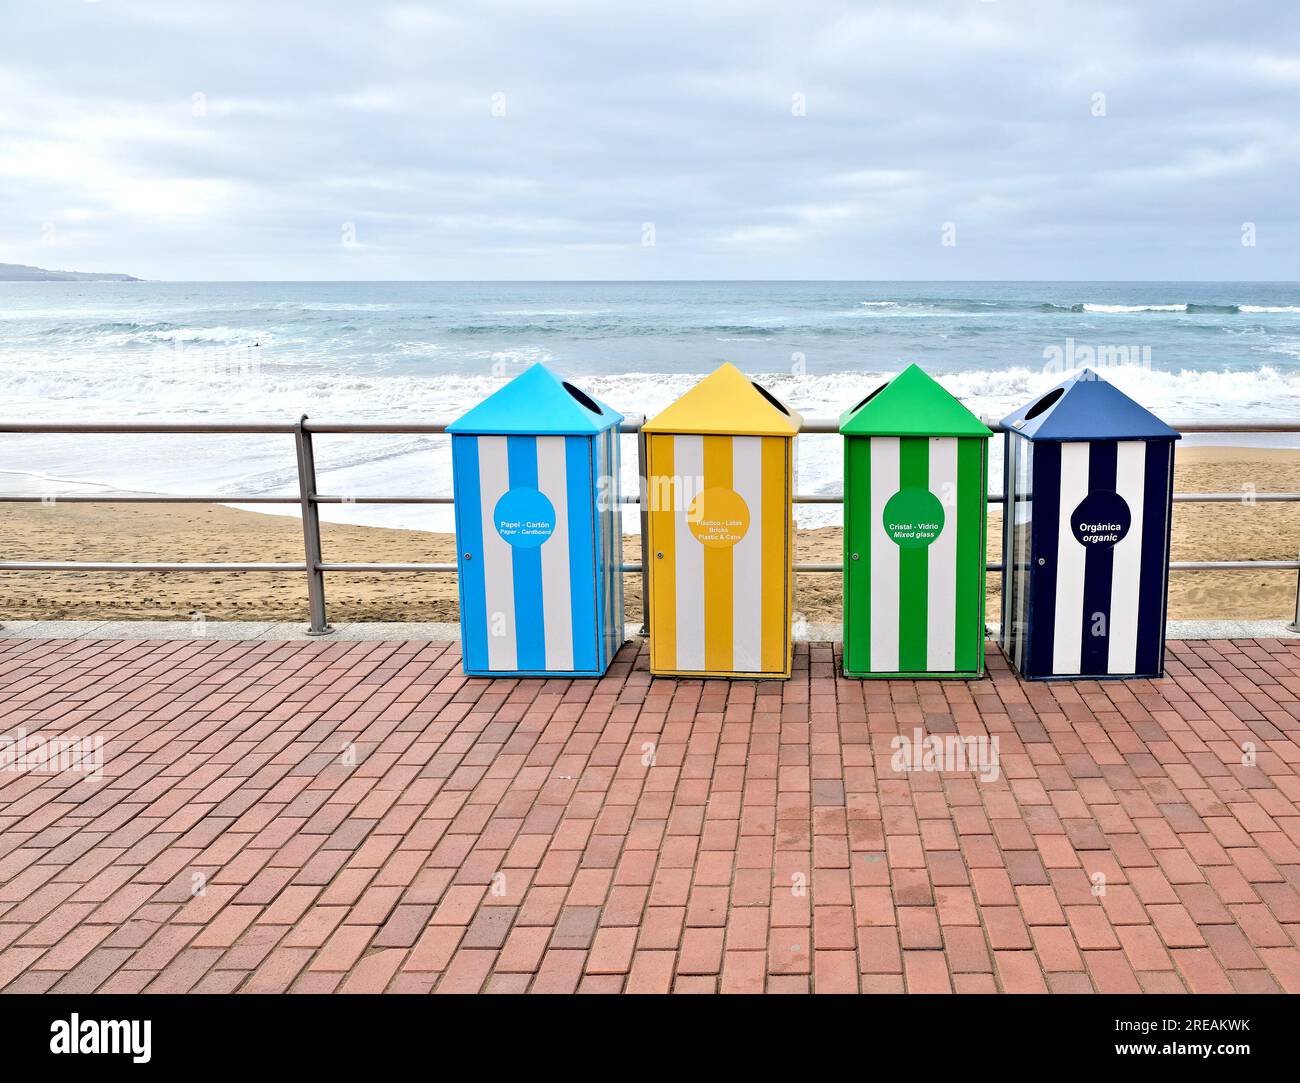 Colorful recycling bins at the beach, with waste management instructions in English and Spanish. Stock Photo